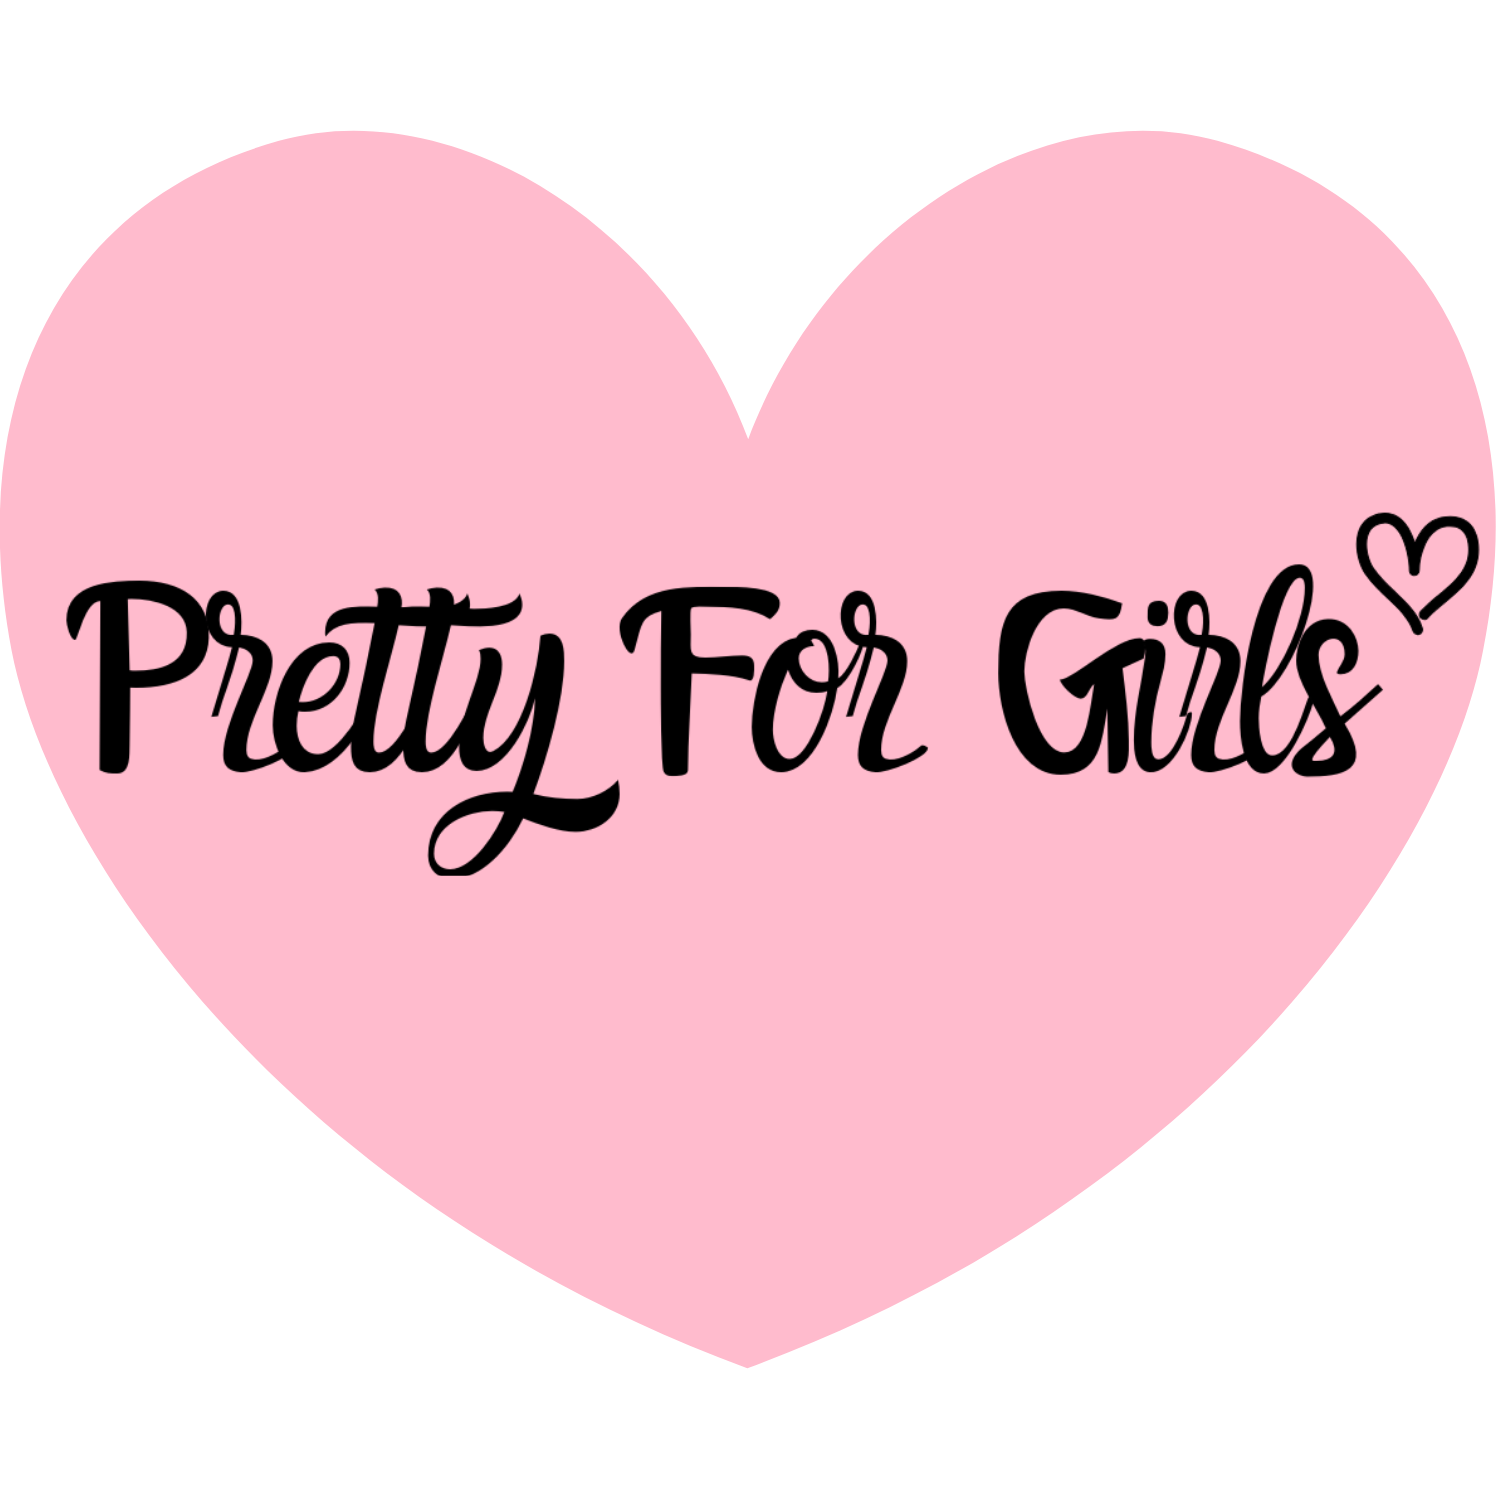 Girly girl Free content, Girly Stuff s, love, text, logo png